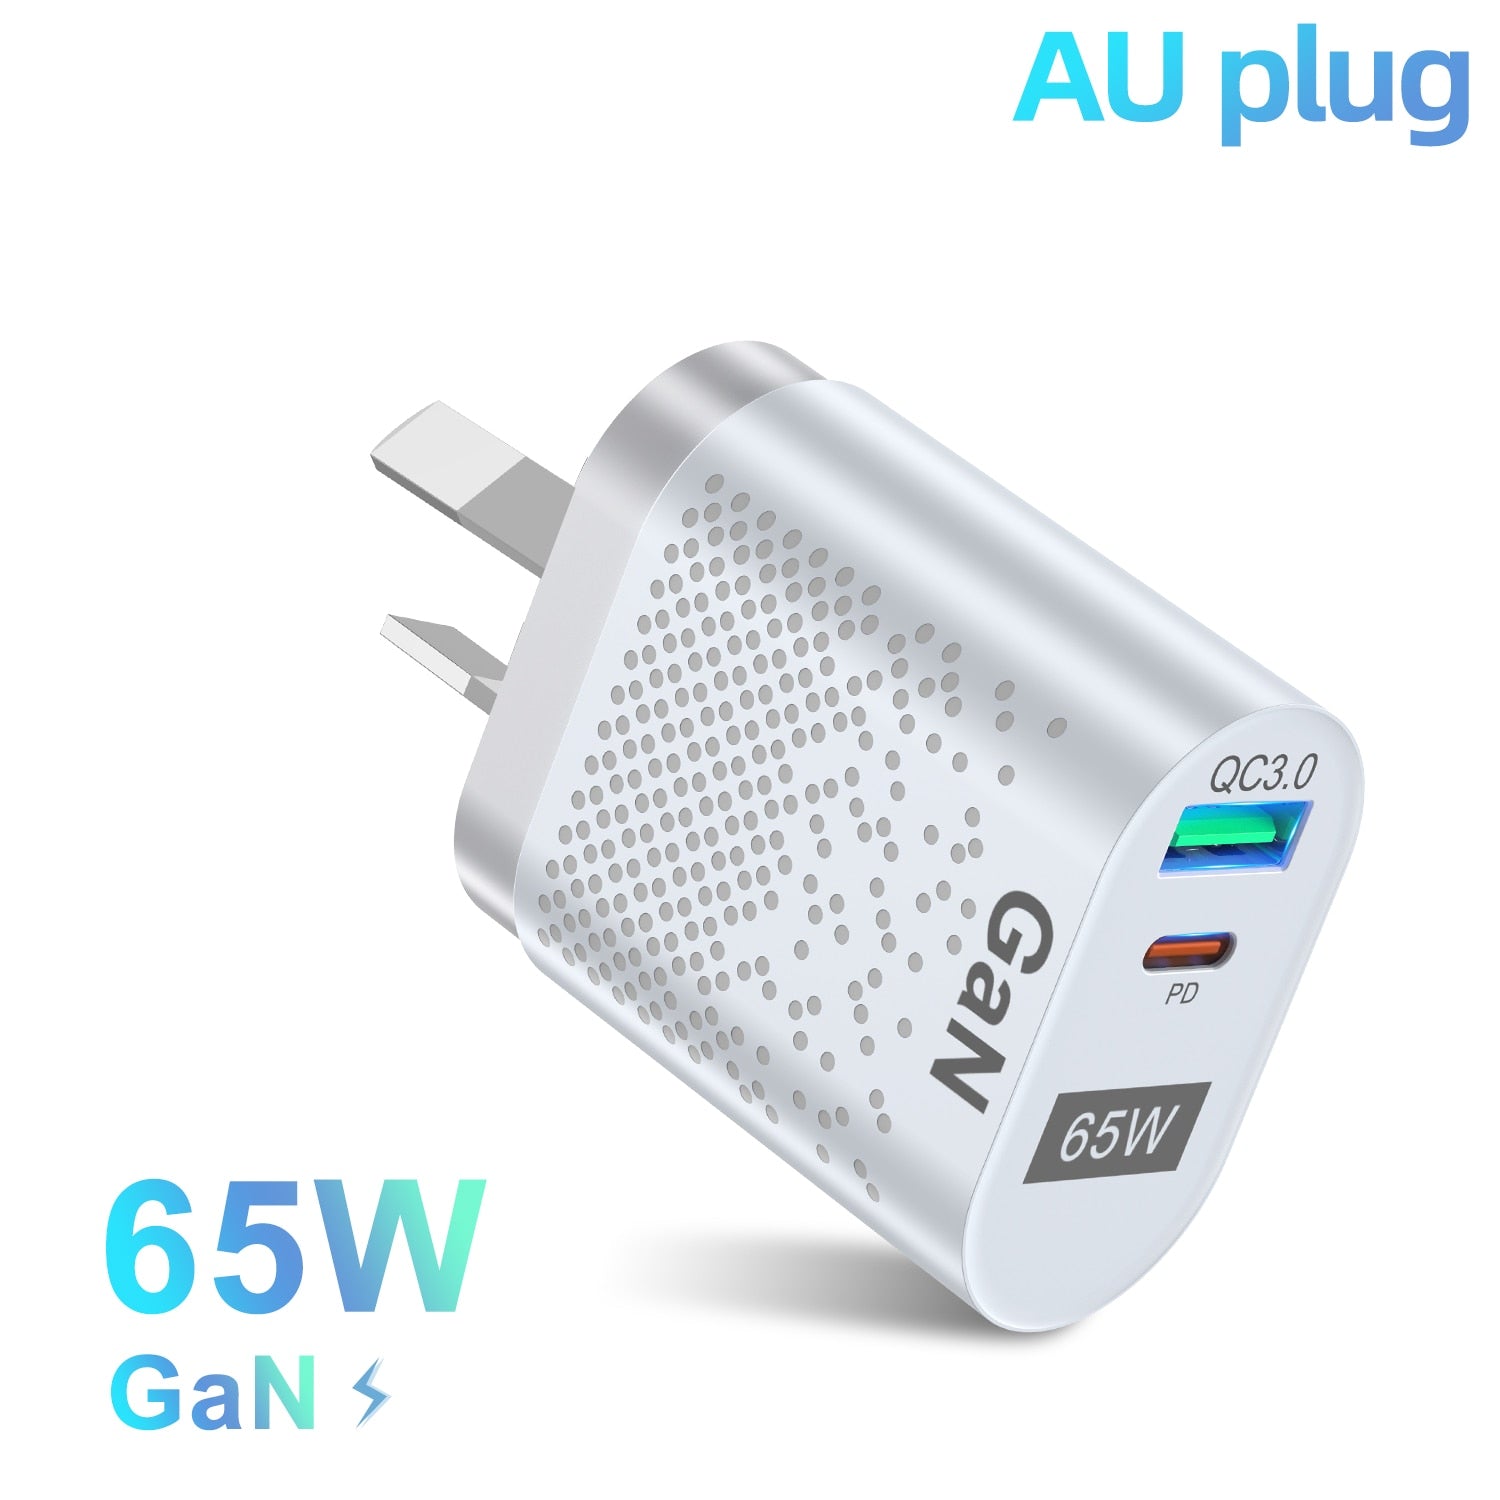 65W Gan Charger for Australia New Zealand AU Plug PD 33W Fast Charger QC 3.0 USB Adapter for iPhone 14 13 Pro Max Samsung S22